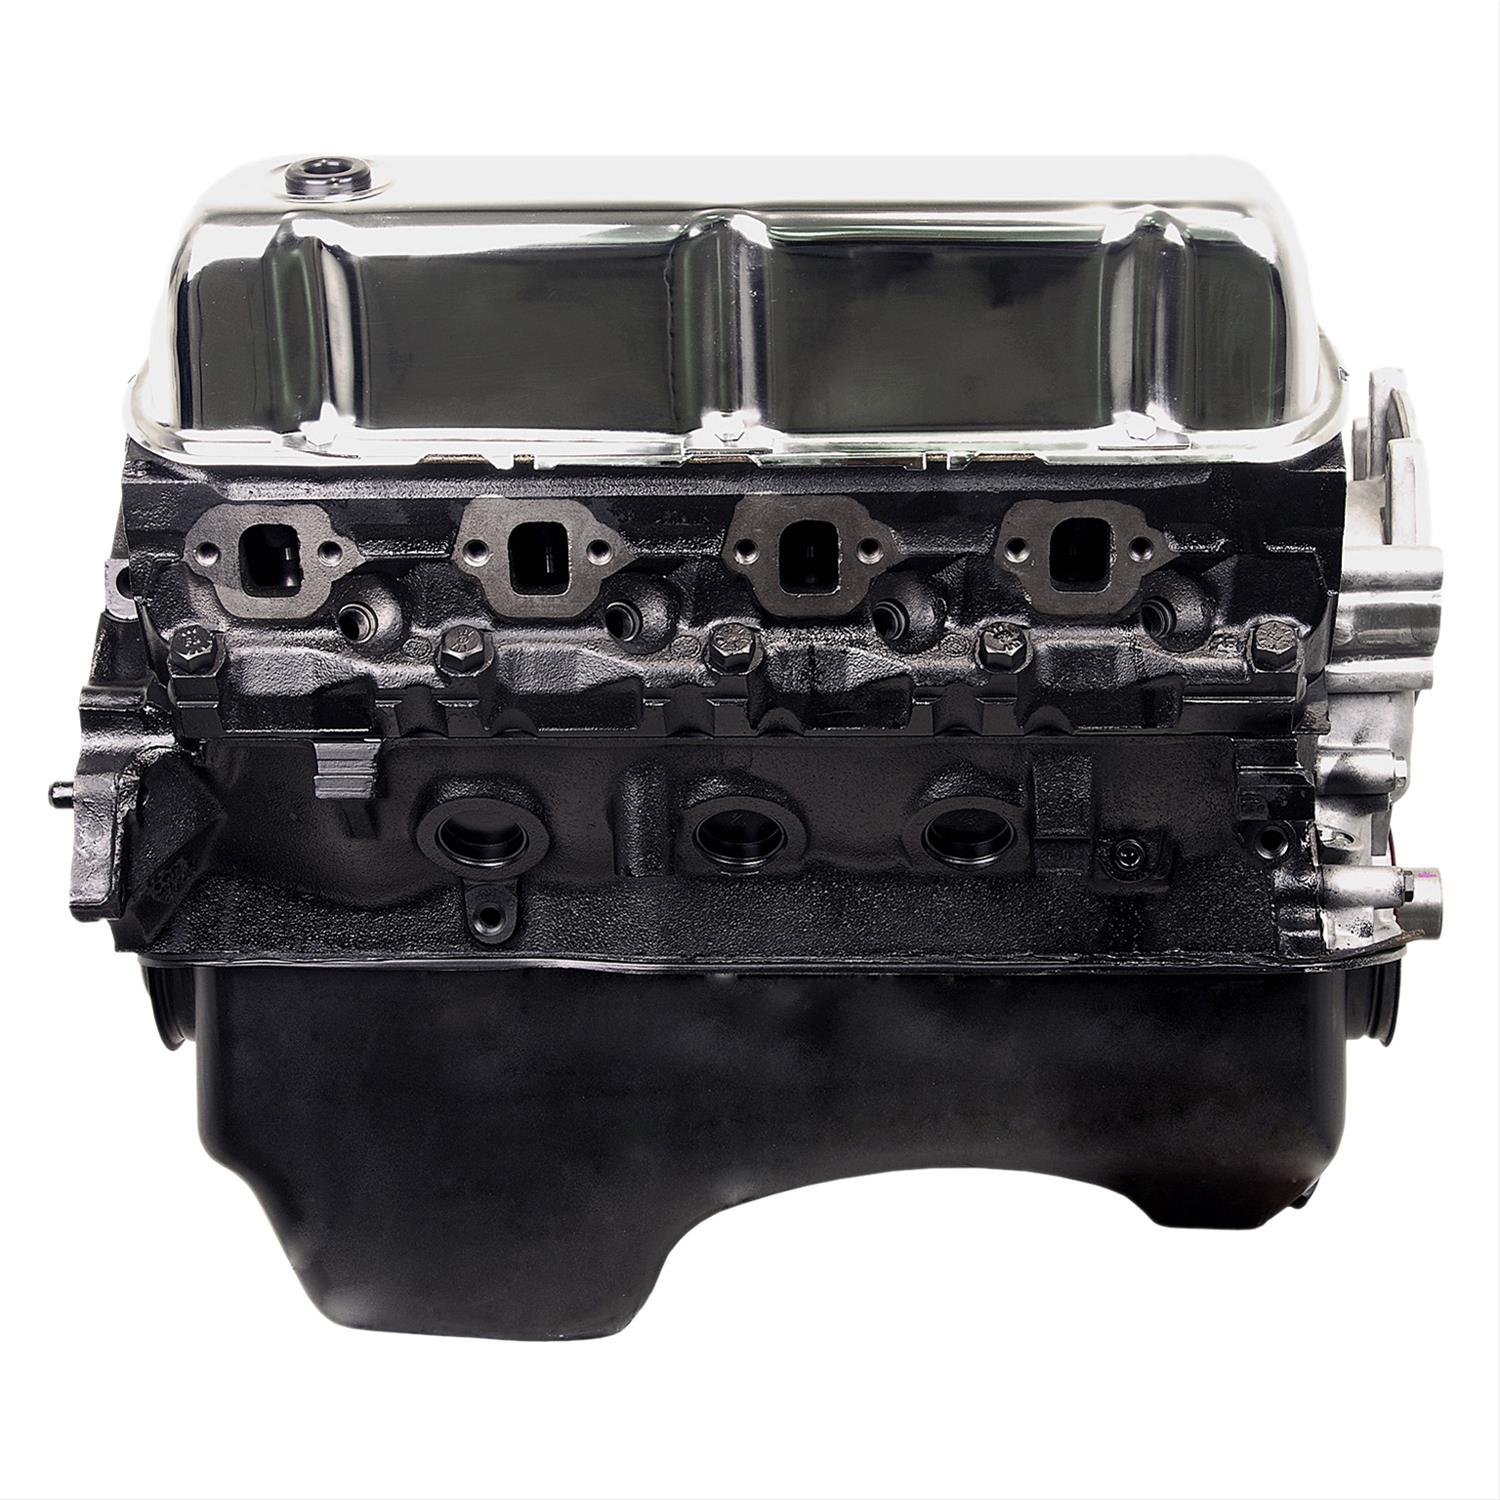 ATK High Performance Engines HP06 ATK High Performance Ford 302 300 HP ...